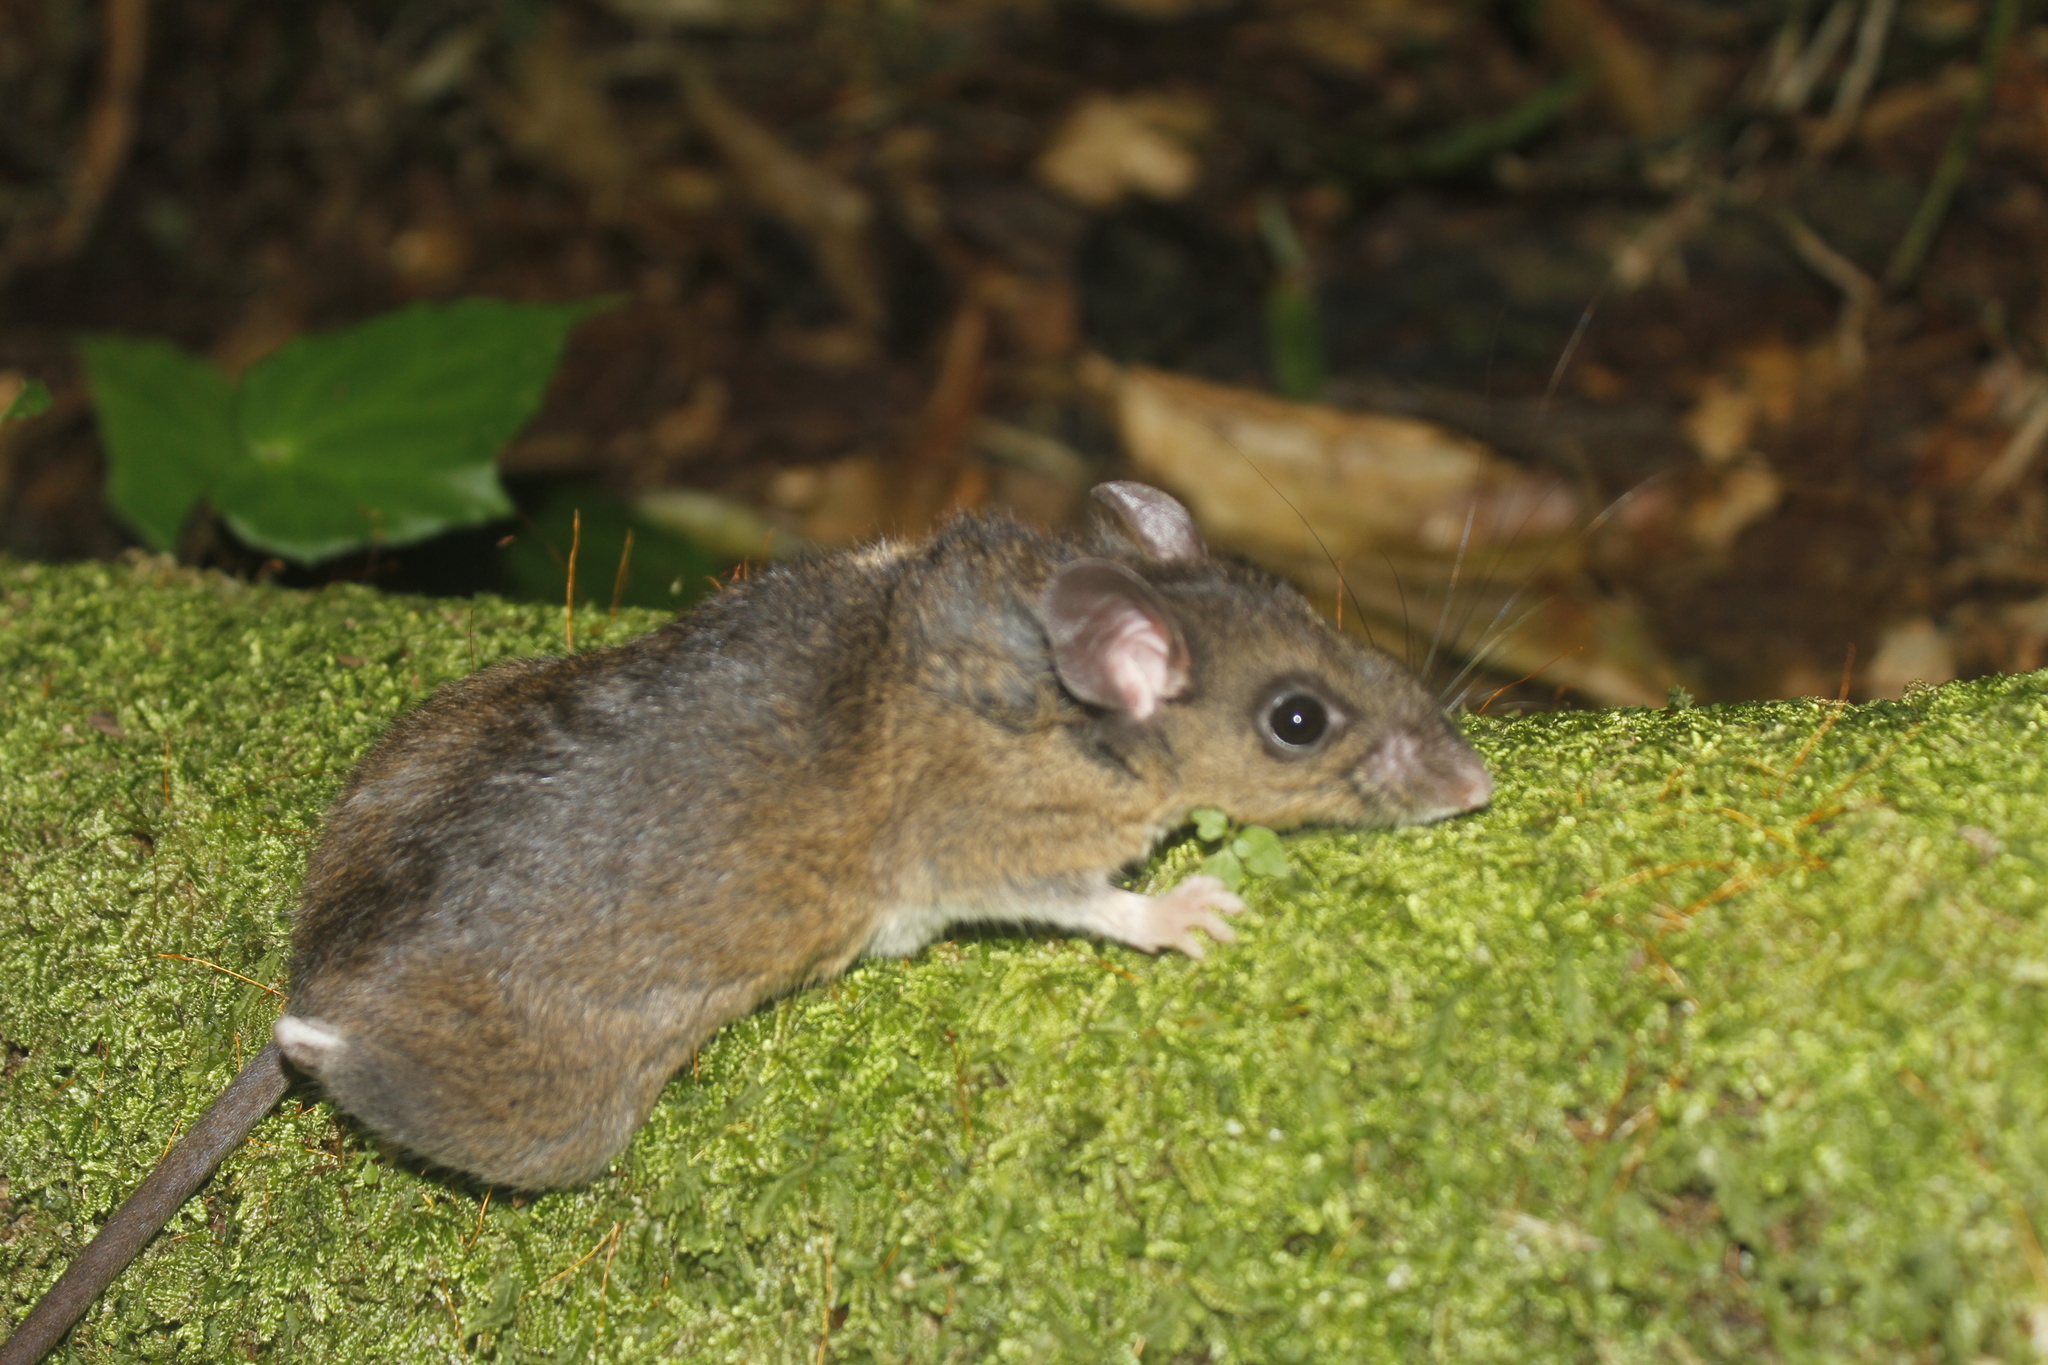 Hantavirus discovered in 3 deer mice in San Diego County, posing a threat.